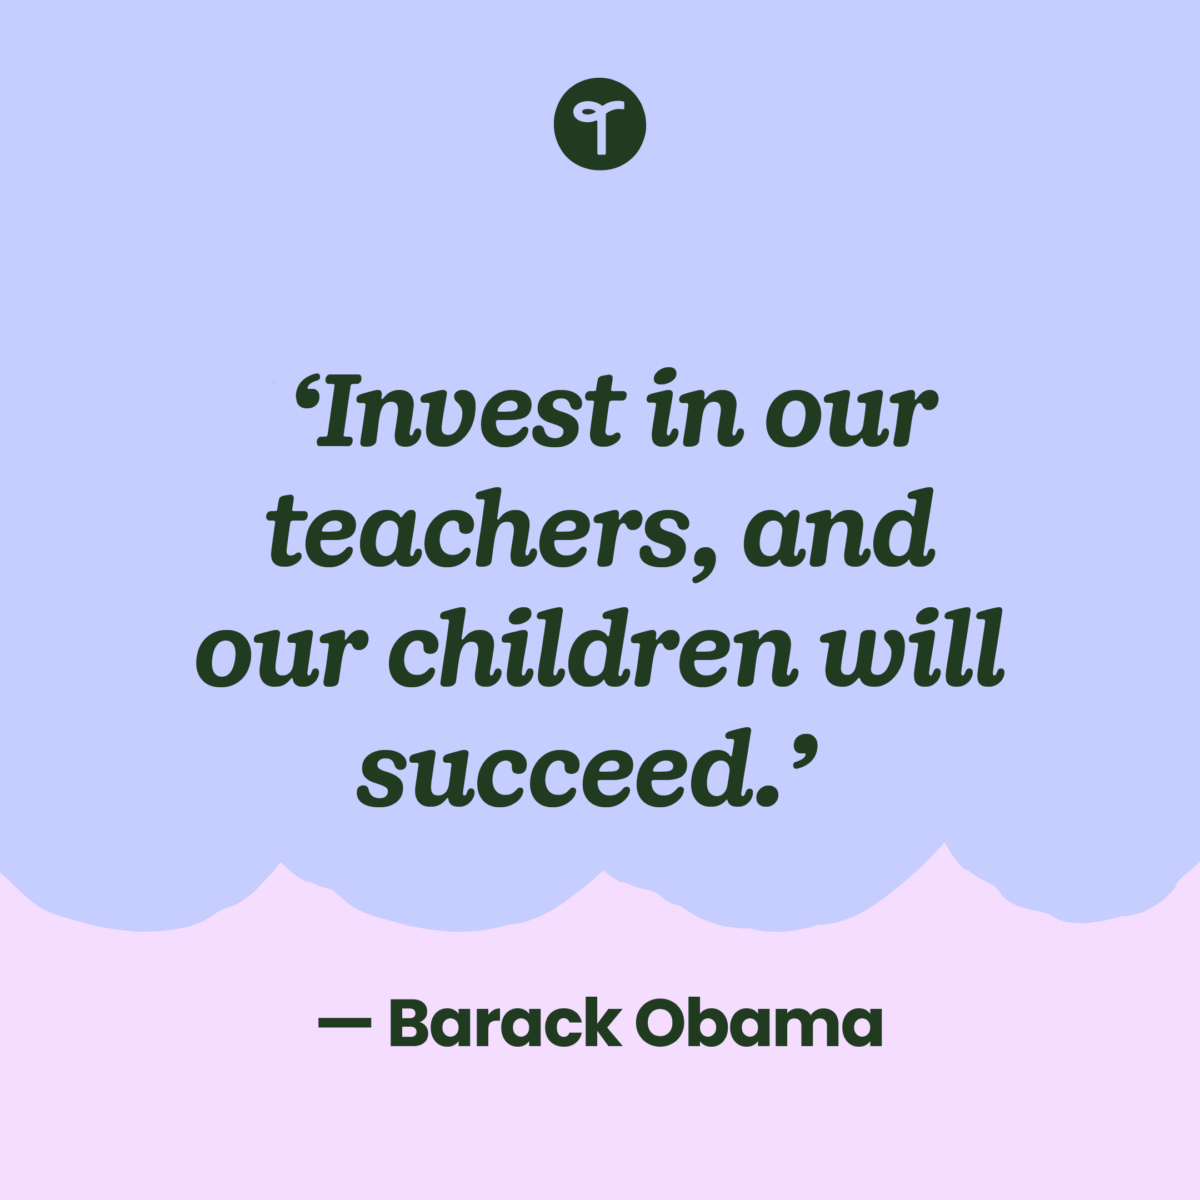 'Invest in our teachers, and our children will succeed.' — Barack Obama written on a purple background with a pink scalloped edge